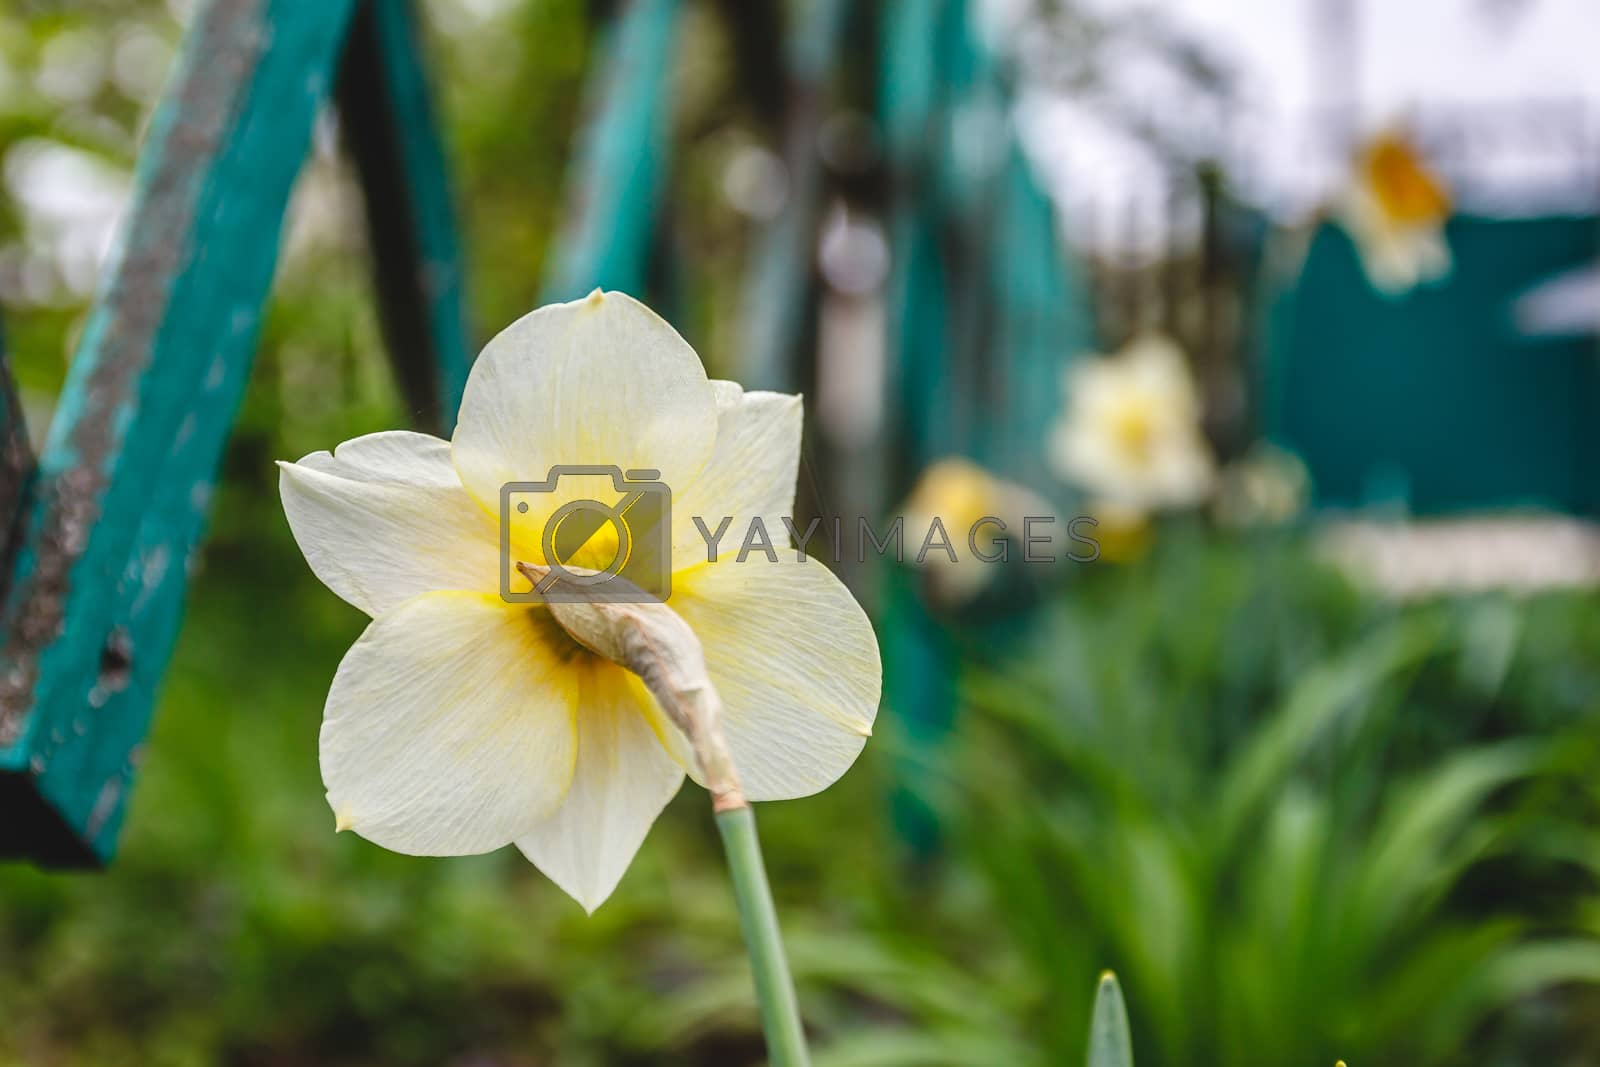 Royalty free image of One flower of narcissus, rear view, against a green background.  by Tanacha